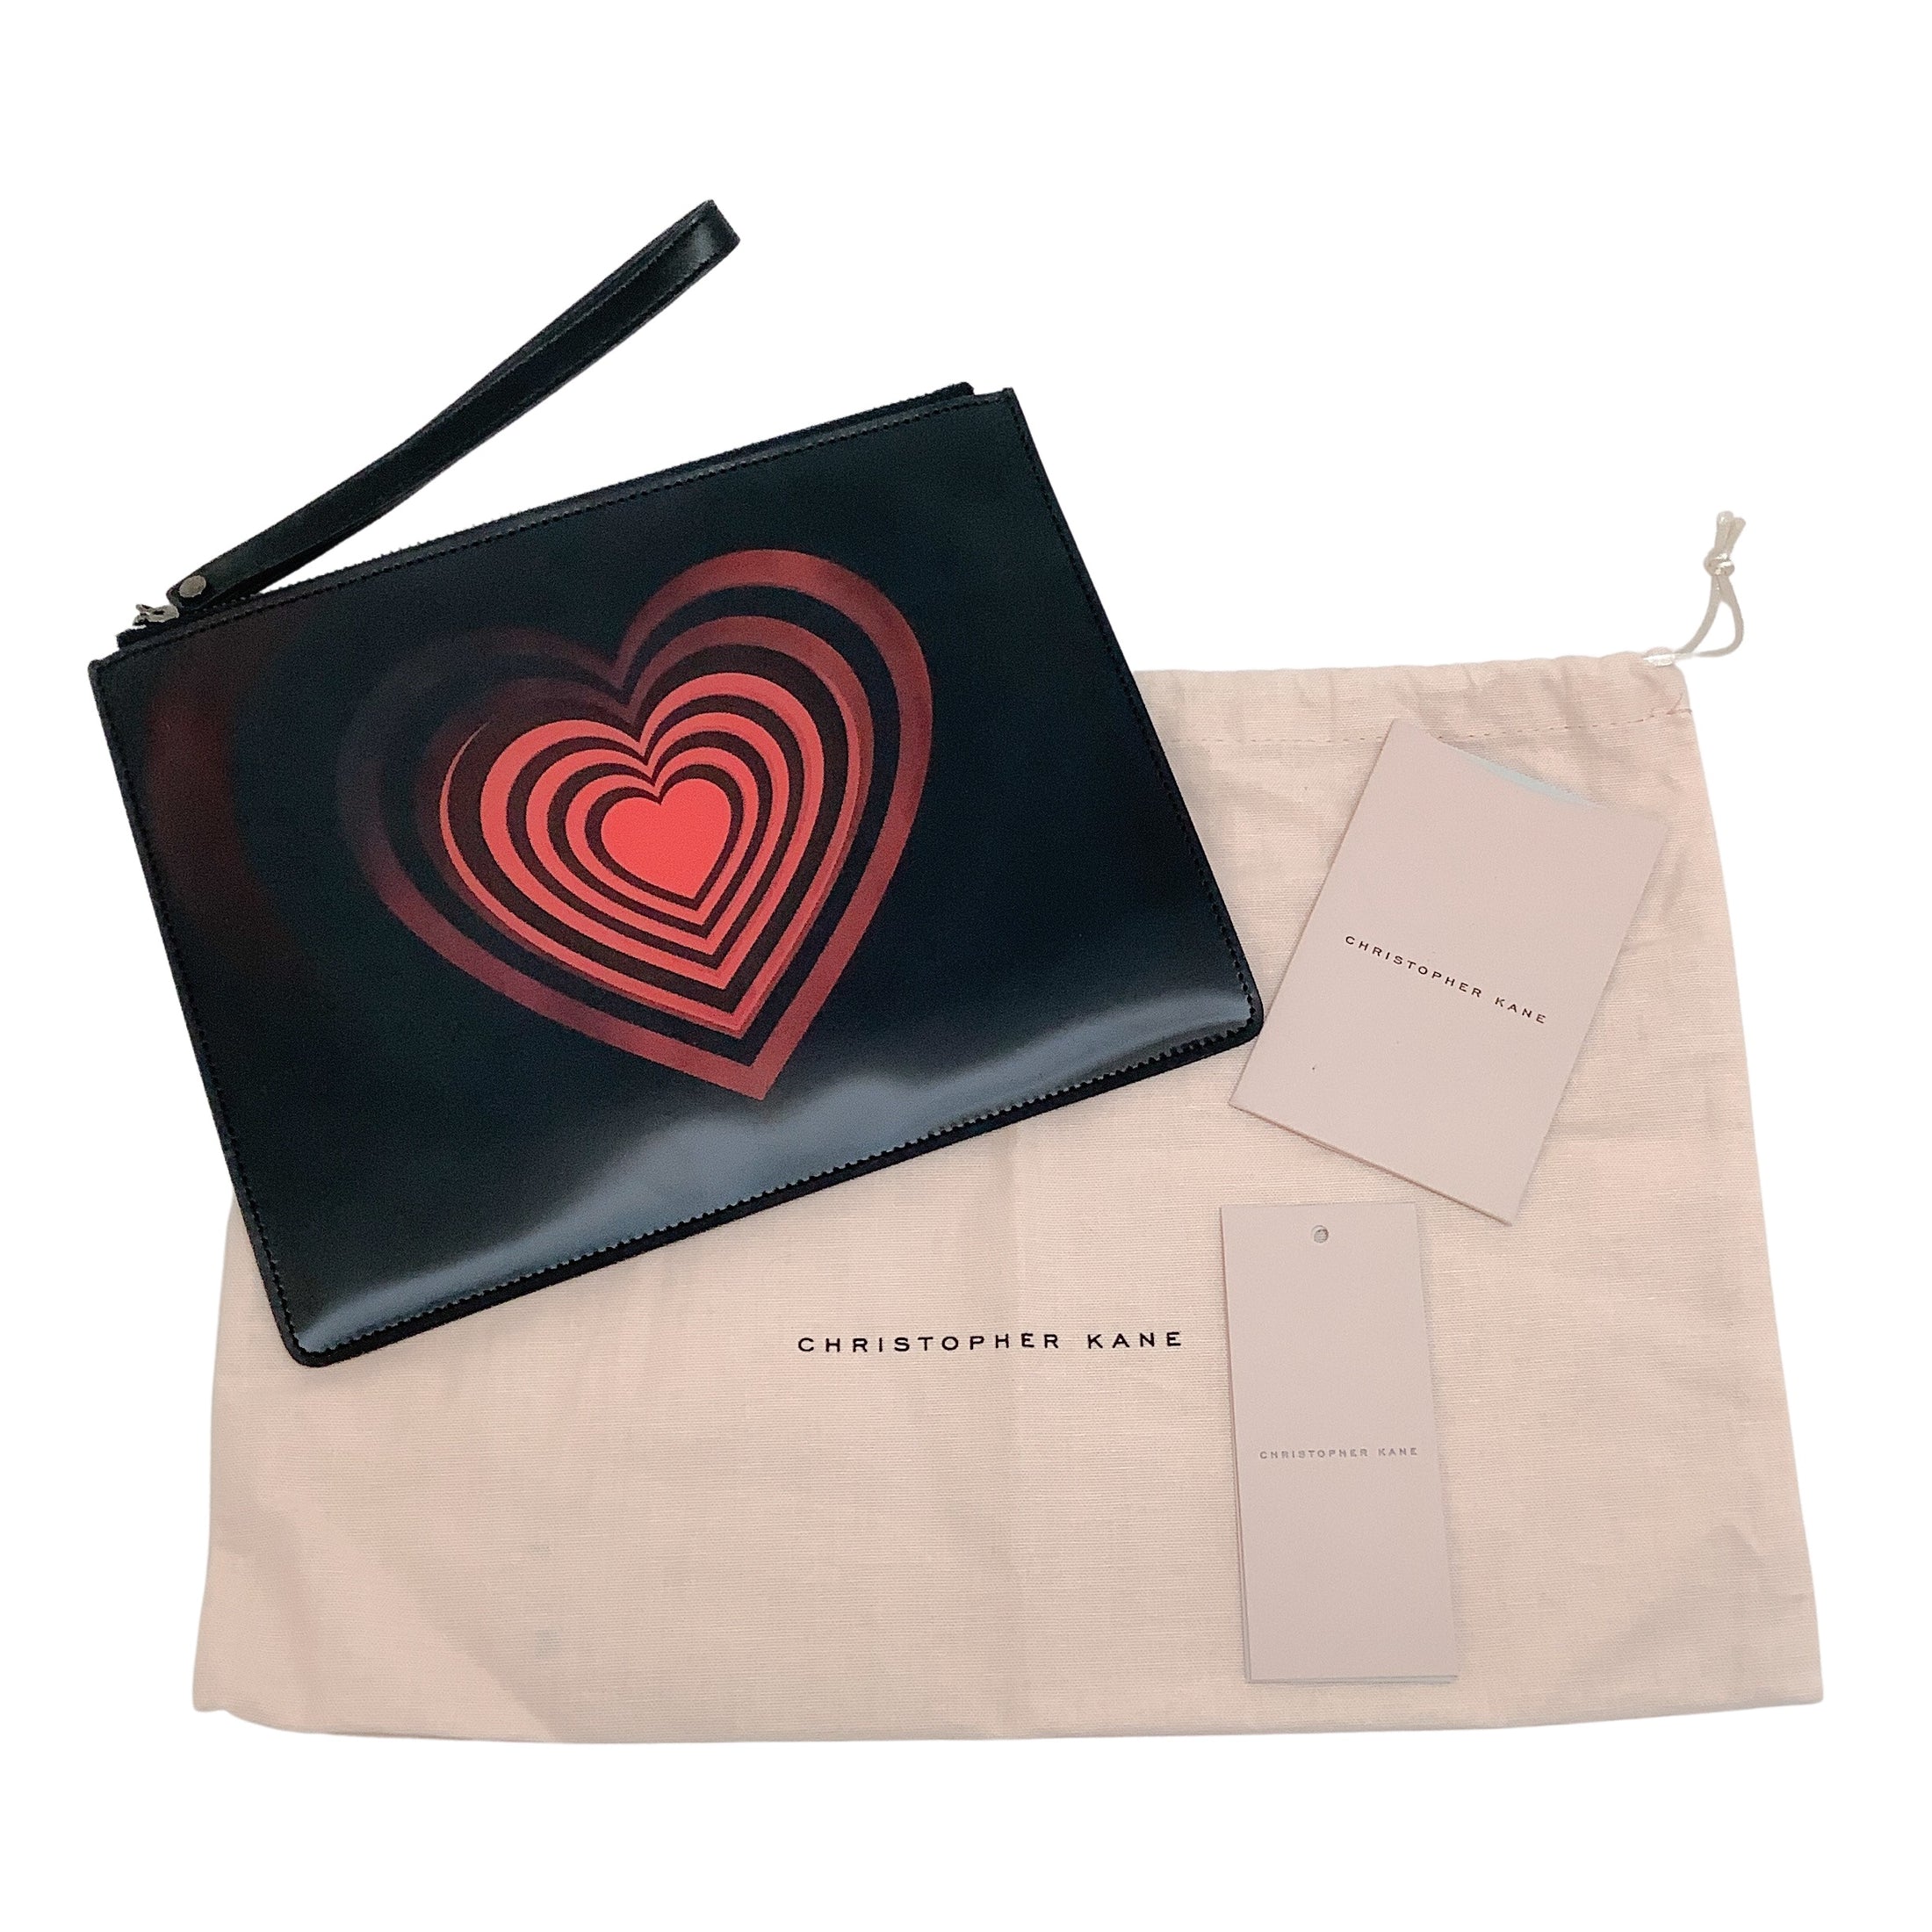 Christopher Kane Black Red Wristlet with Iridescent Heart